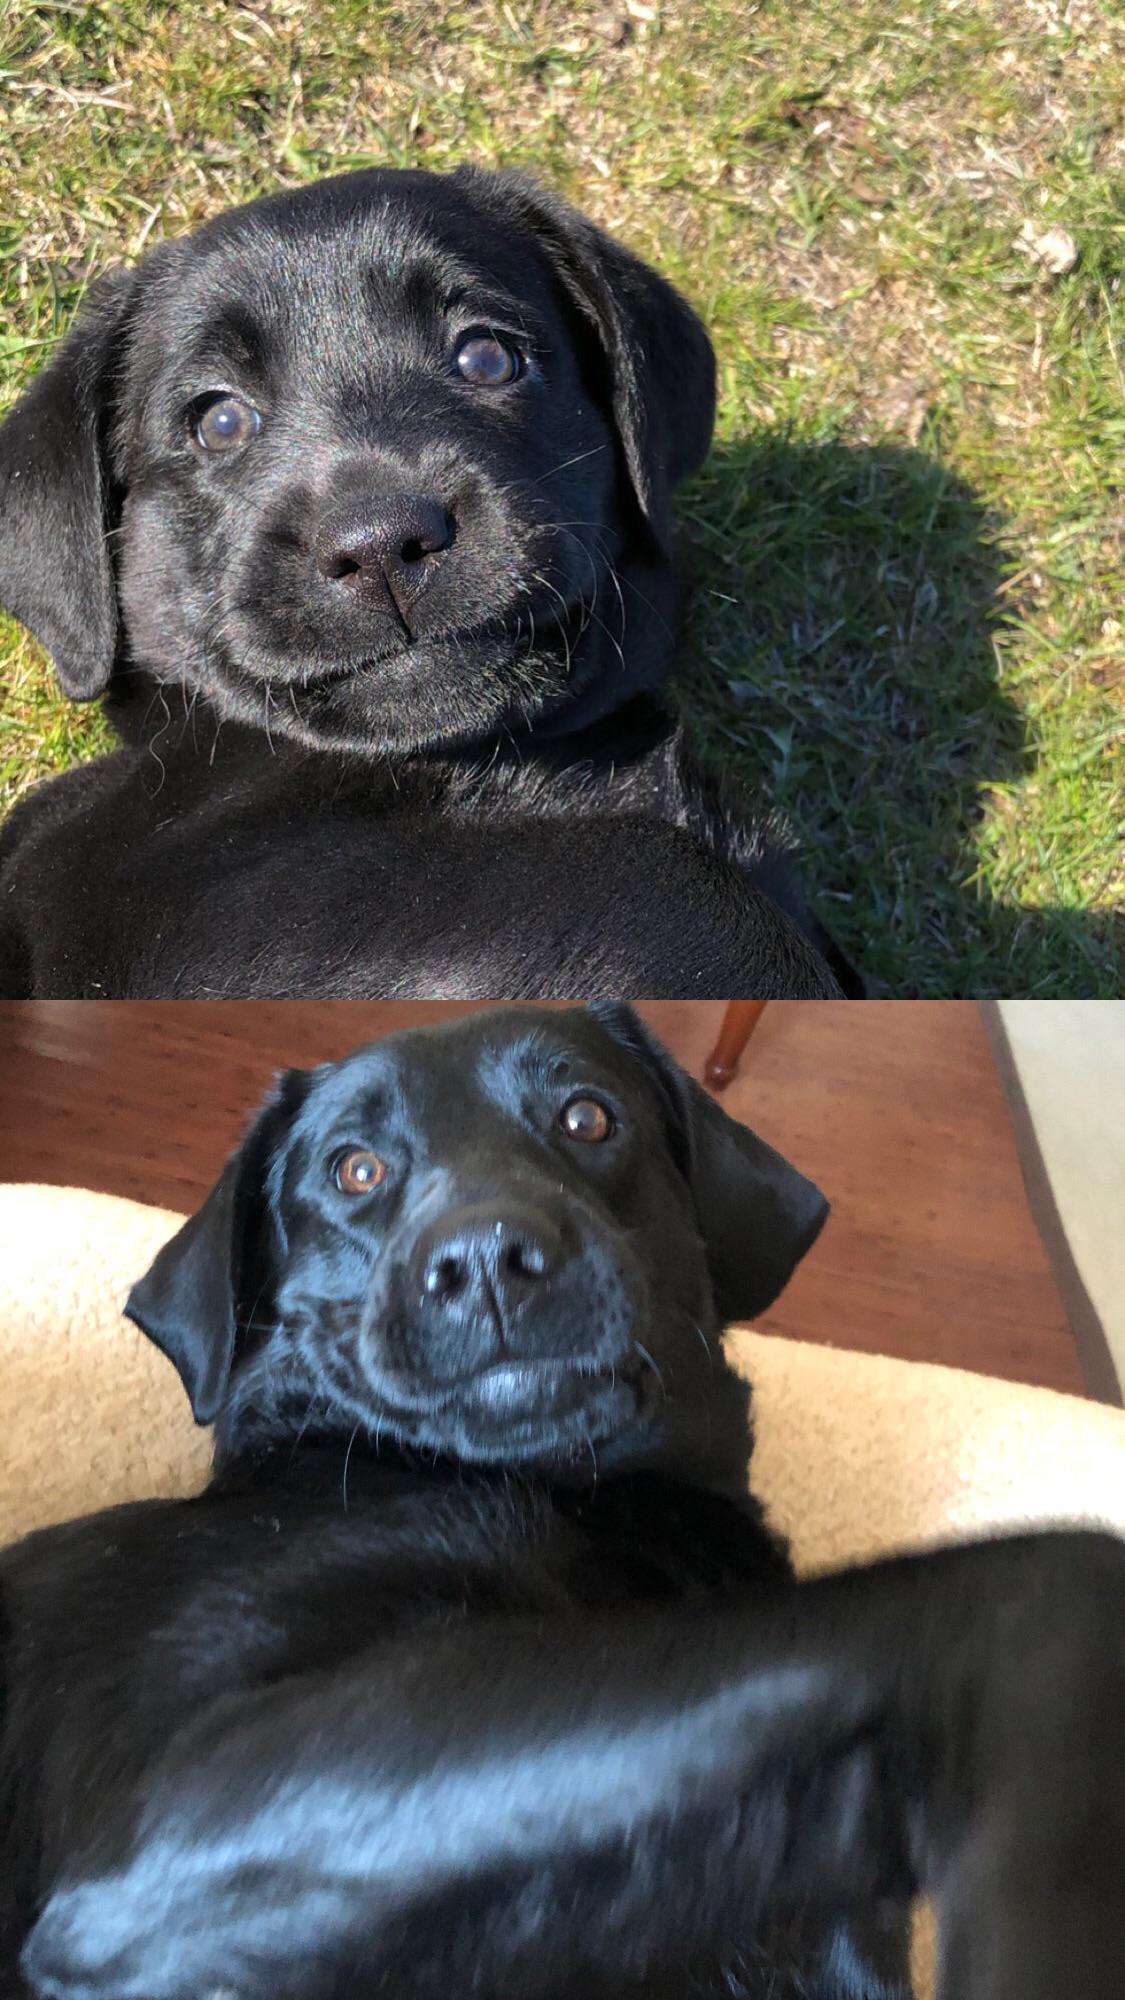 black dog as a puppy and 2 years later. the look on his face is exactly the same in both pictures